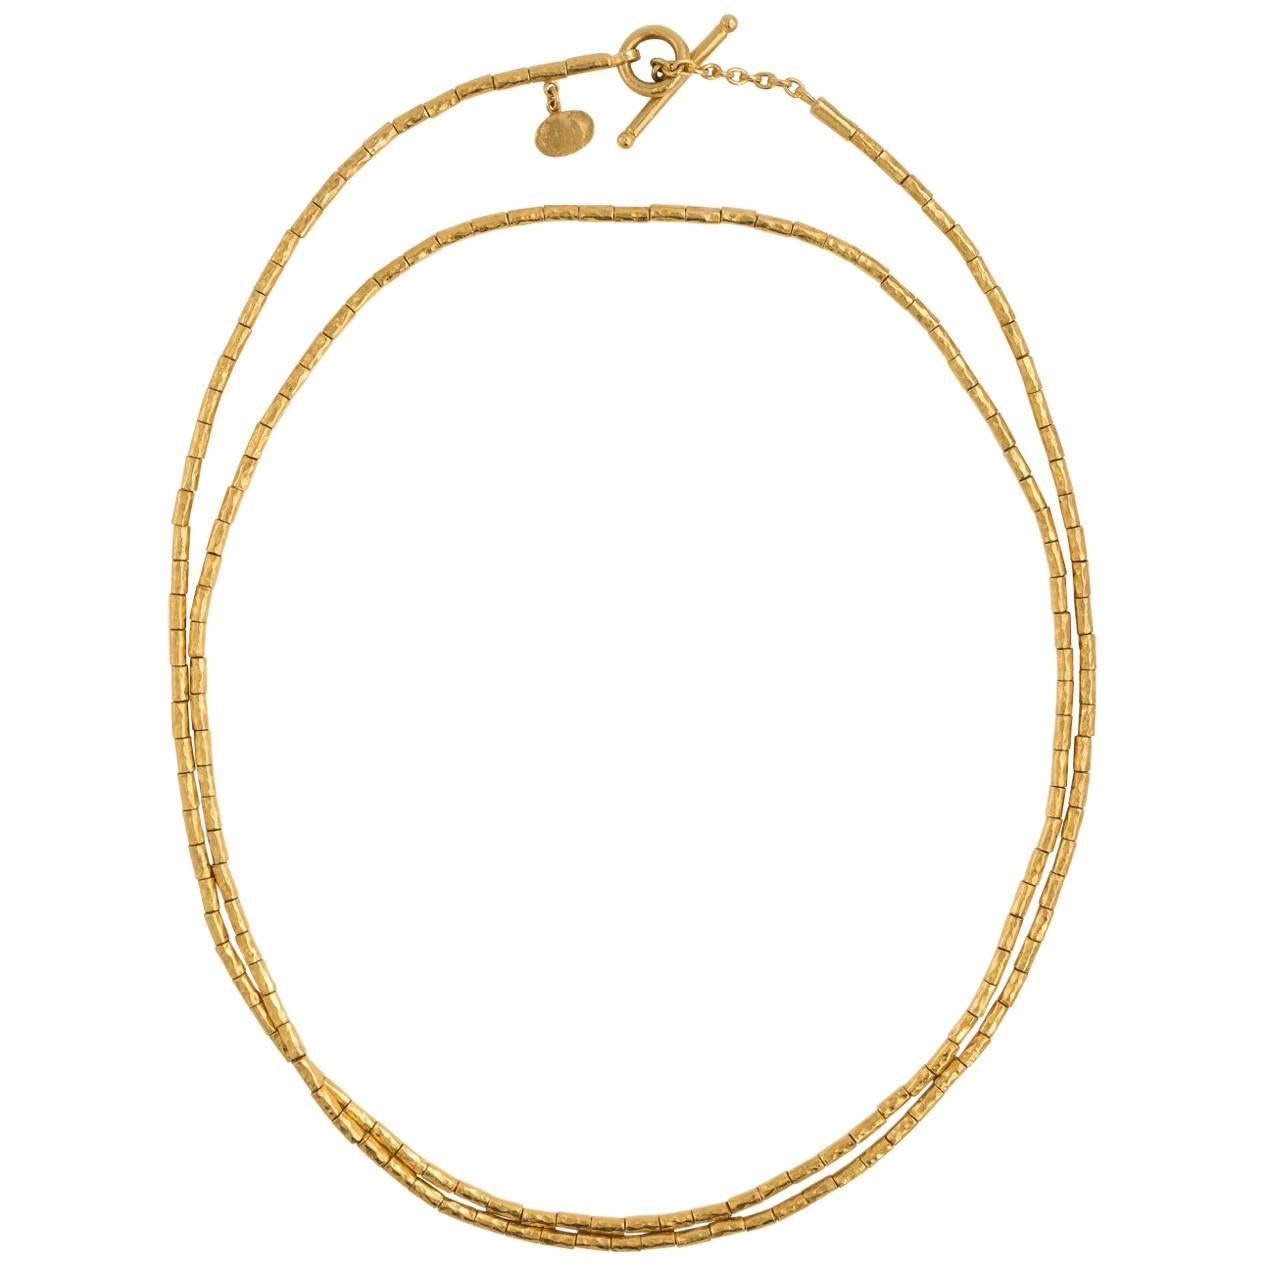 Yossi Harari Pure Gold Bamboo Links Toggle Necklace from the Rachel Collection